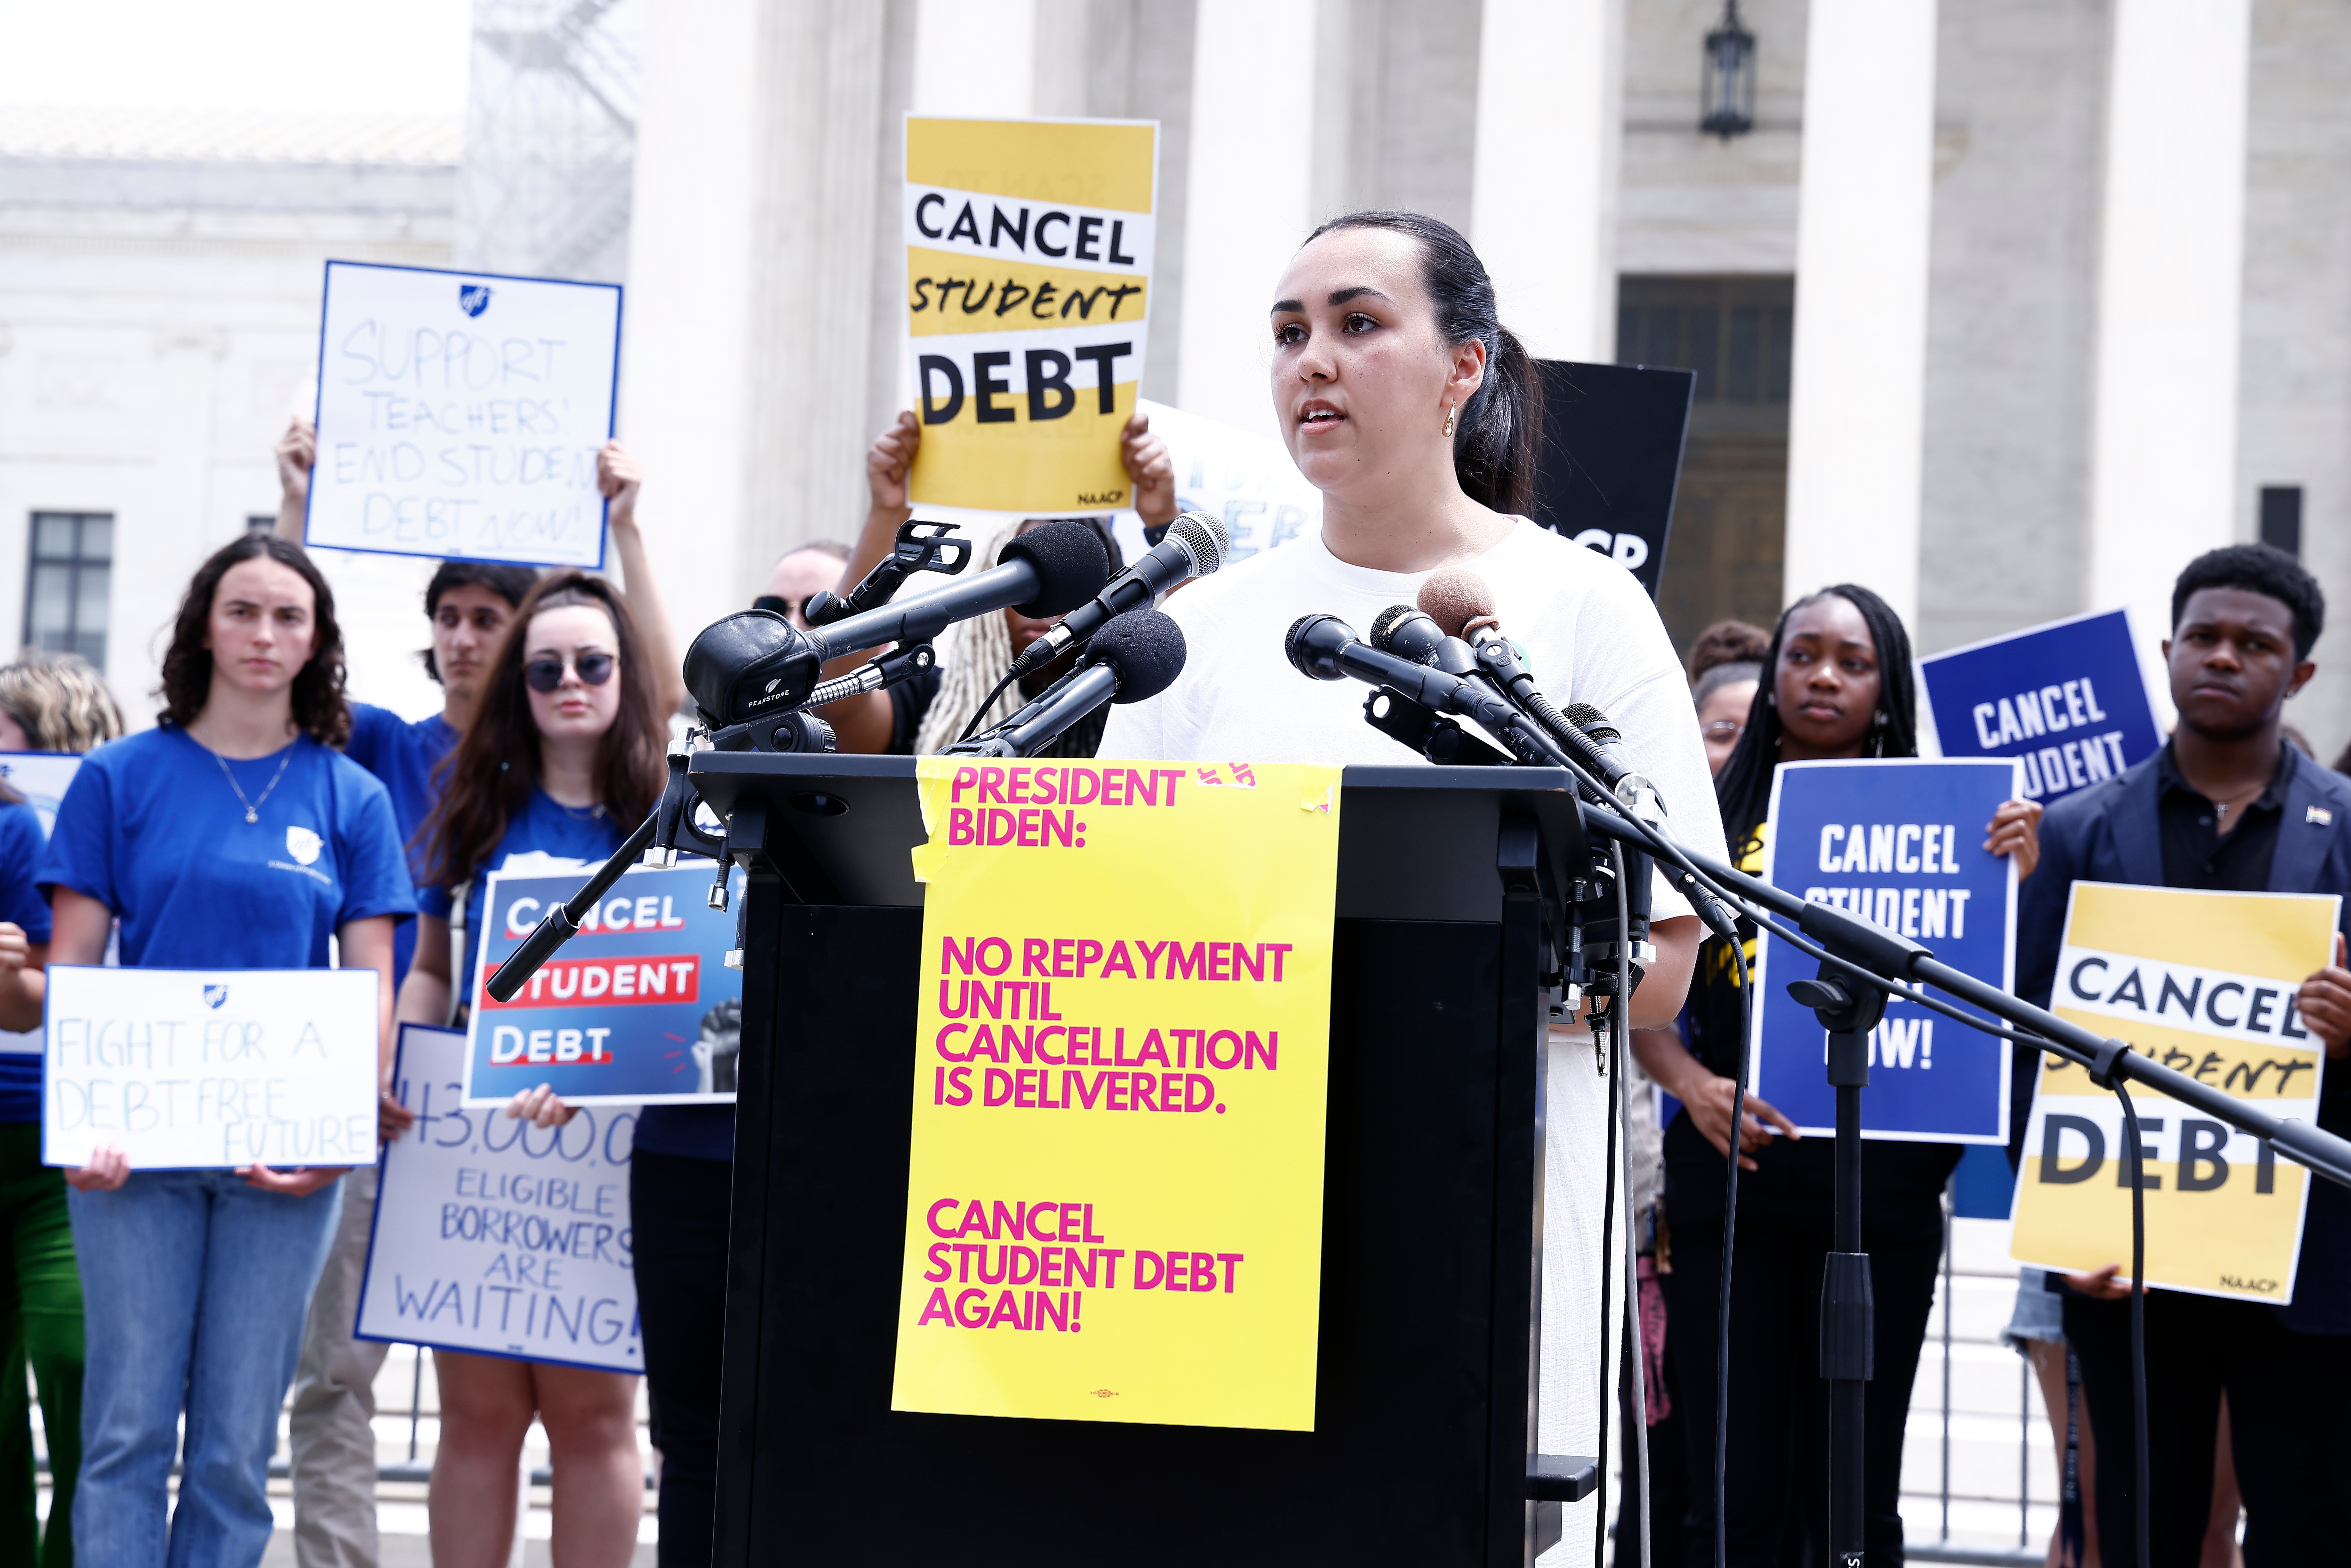 Sabrina Calazans, SDCC, joins student loan borrowers to demand President Biden use "Plan B" to cancel student debt Immediately at a rally outside of the Supreme Court of the United States on June 30, 2023 in Washington, DC. (Photo by Paul Morigi/Getty Images for We The 45 Million)